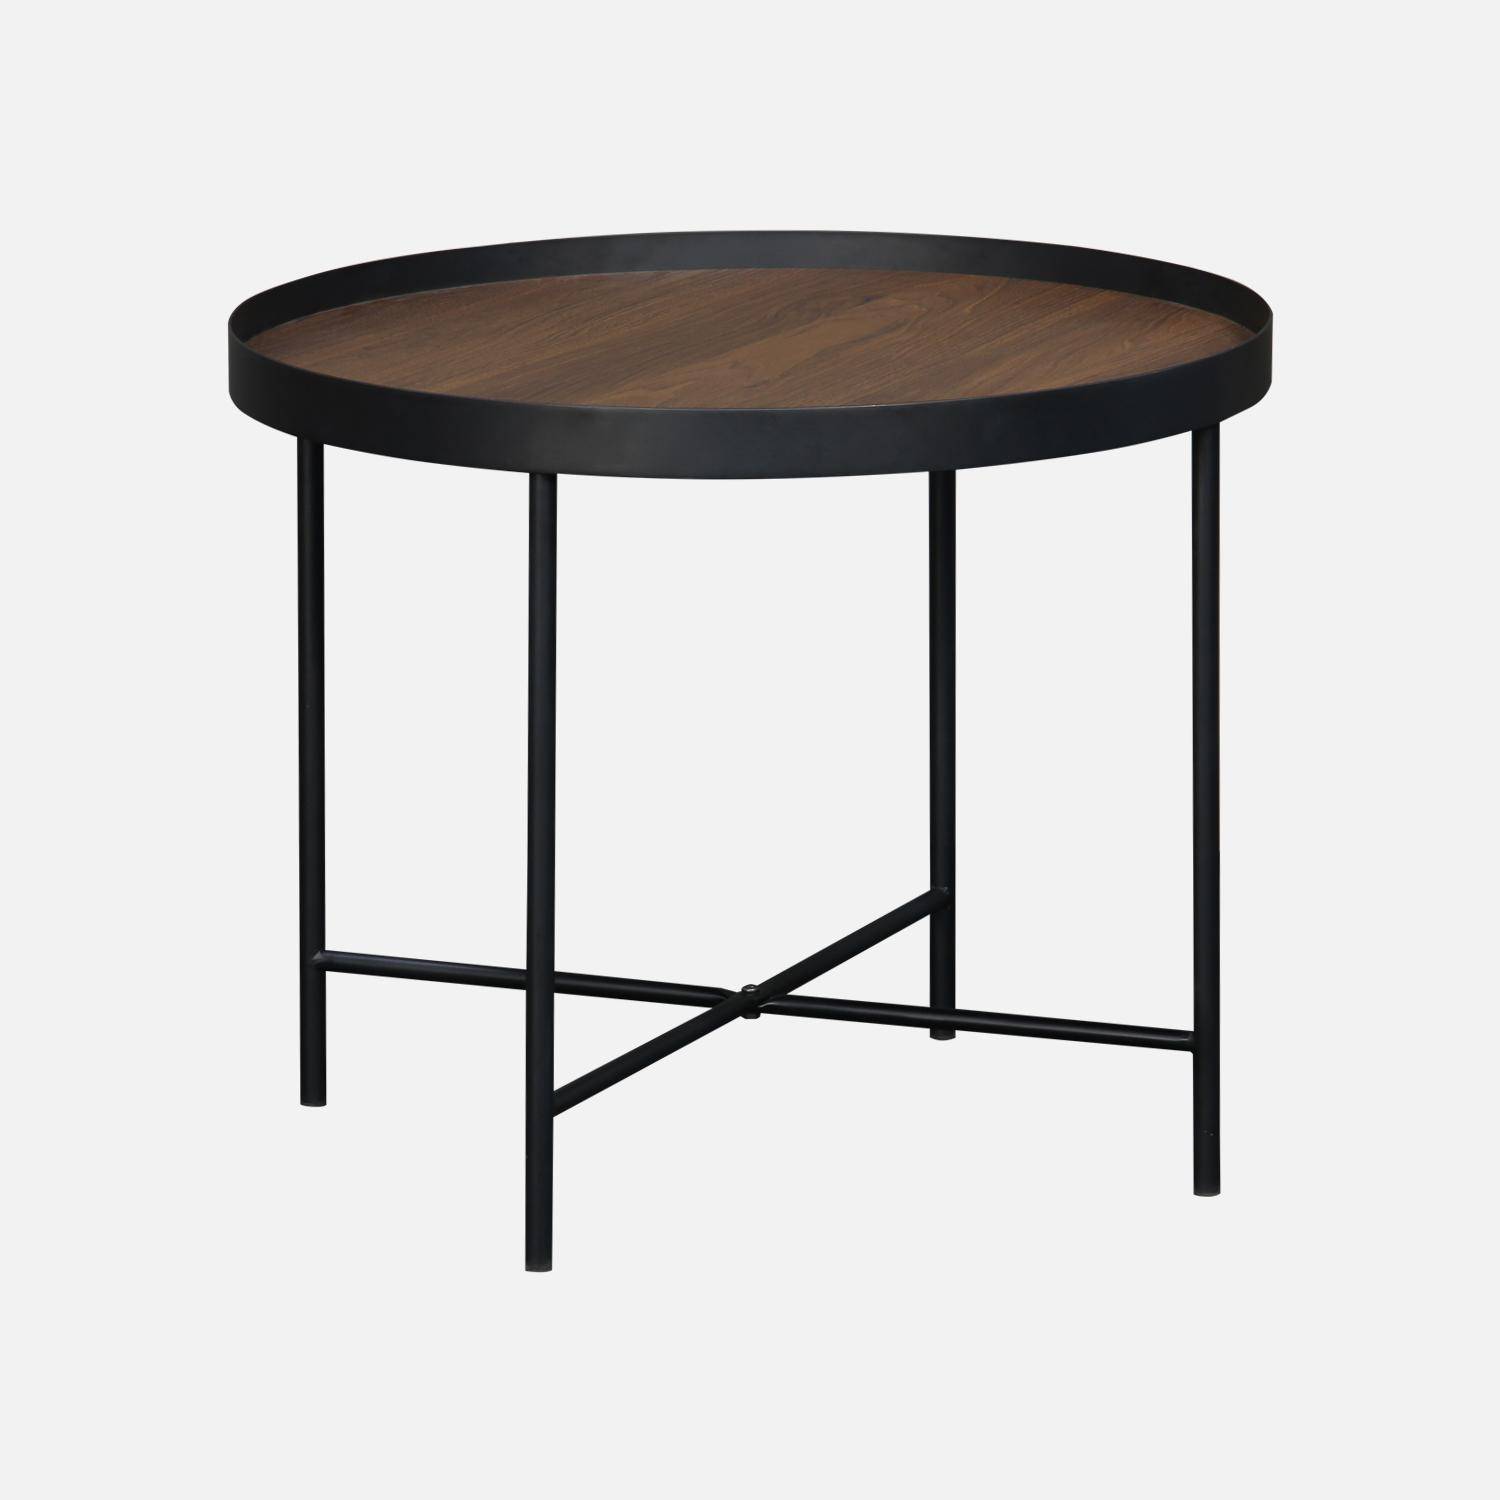 Set of 2 practical round nesting tables in walnut-effect MDF with black legs Photo4